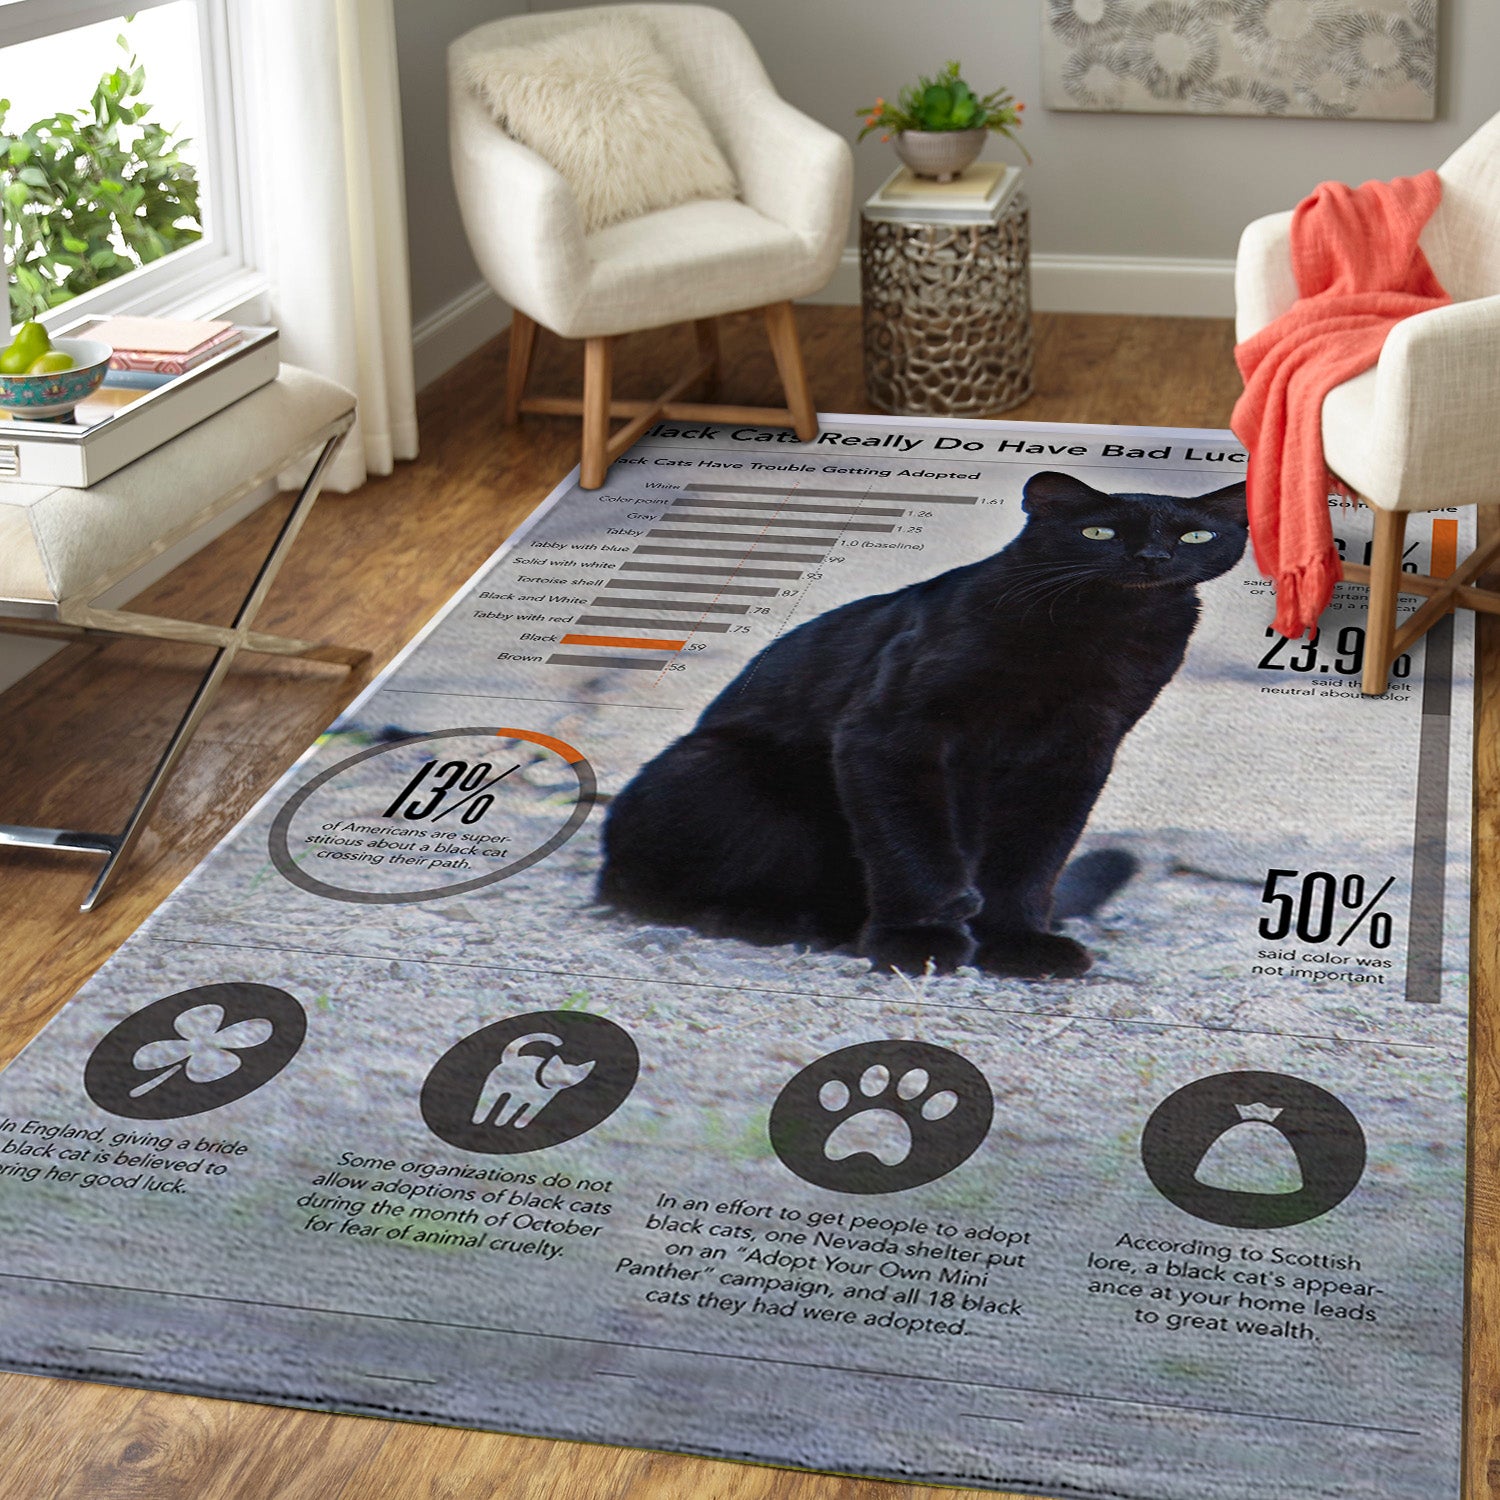 Interesting things about black cats Area rug 06051